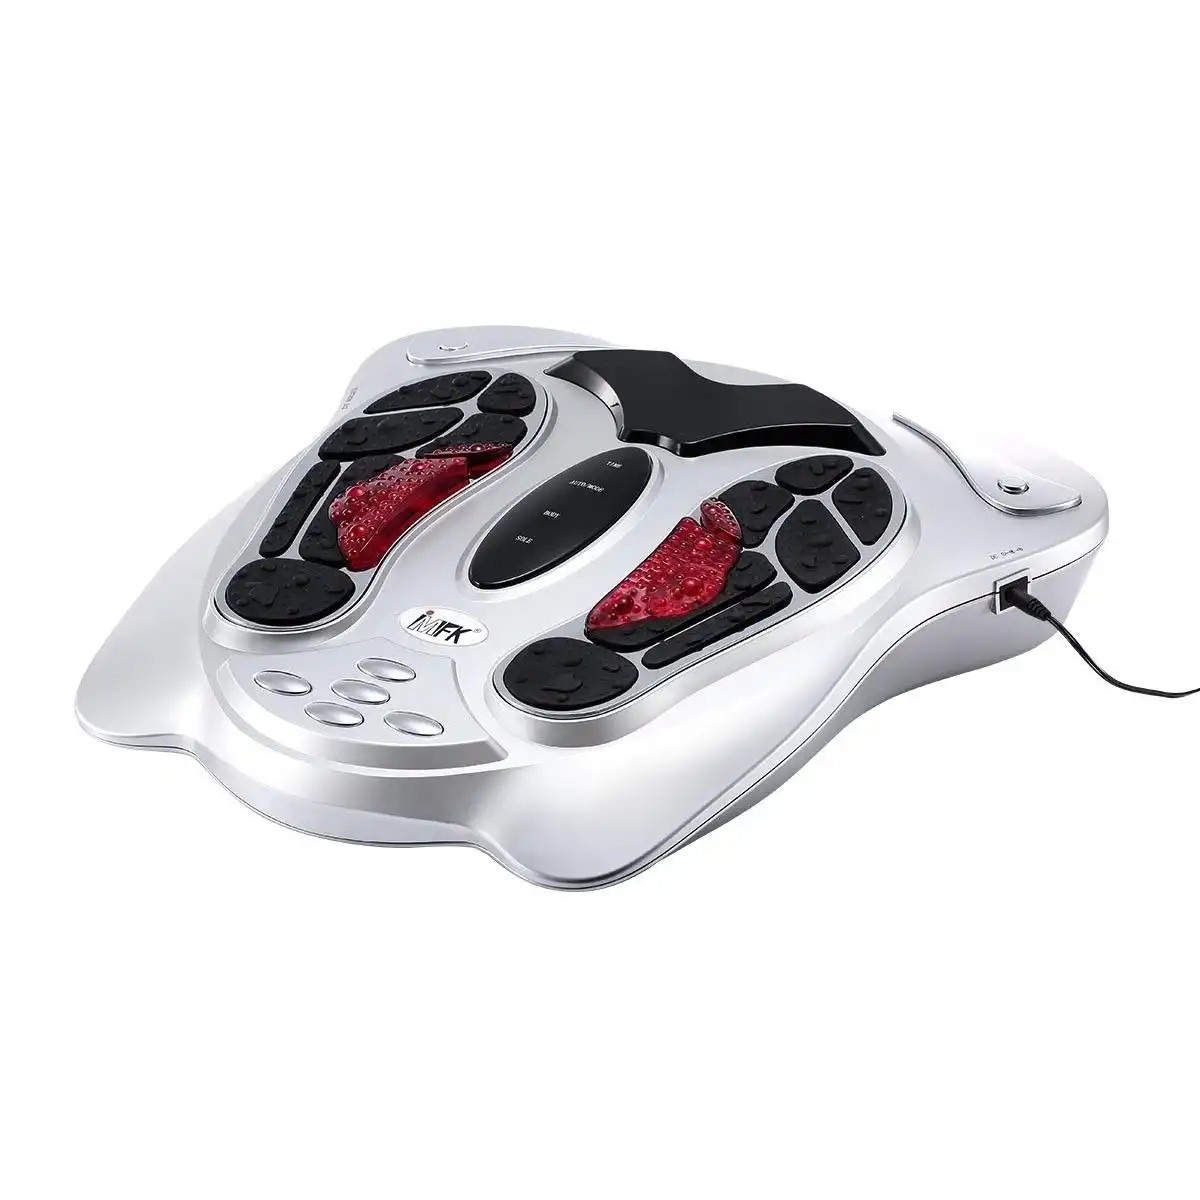 Ausway Electromagnetic Wave Pulse Foot Circulation Improve Promoter Heat Massager Machine